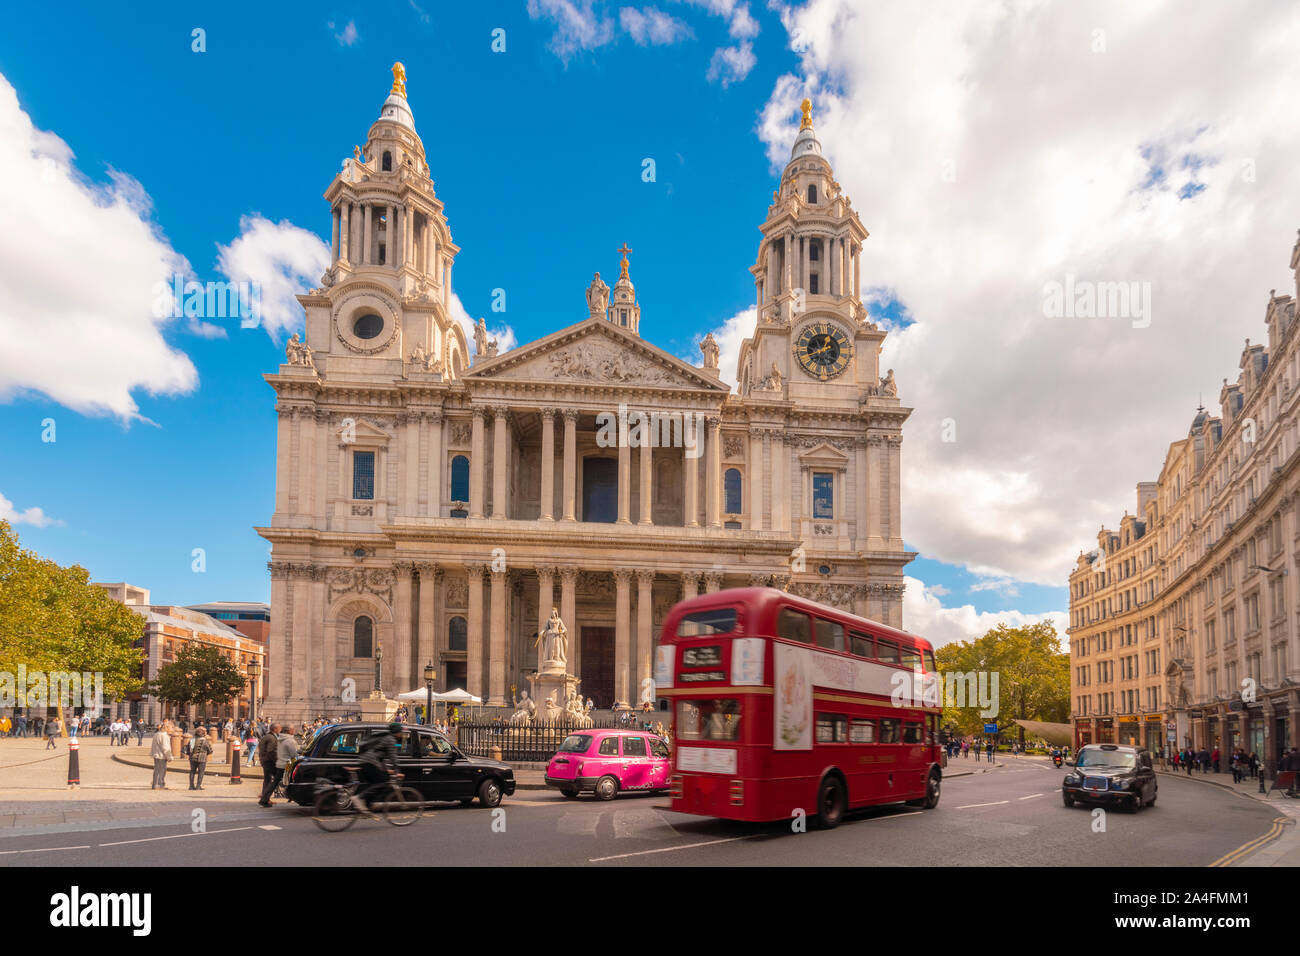 St Paul's Cathedral in sunny day with red bus and london taxi Stock Photo